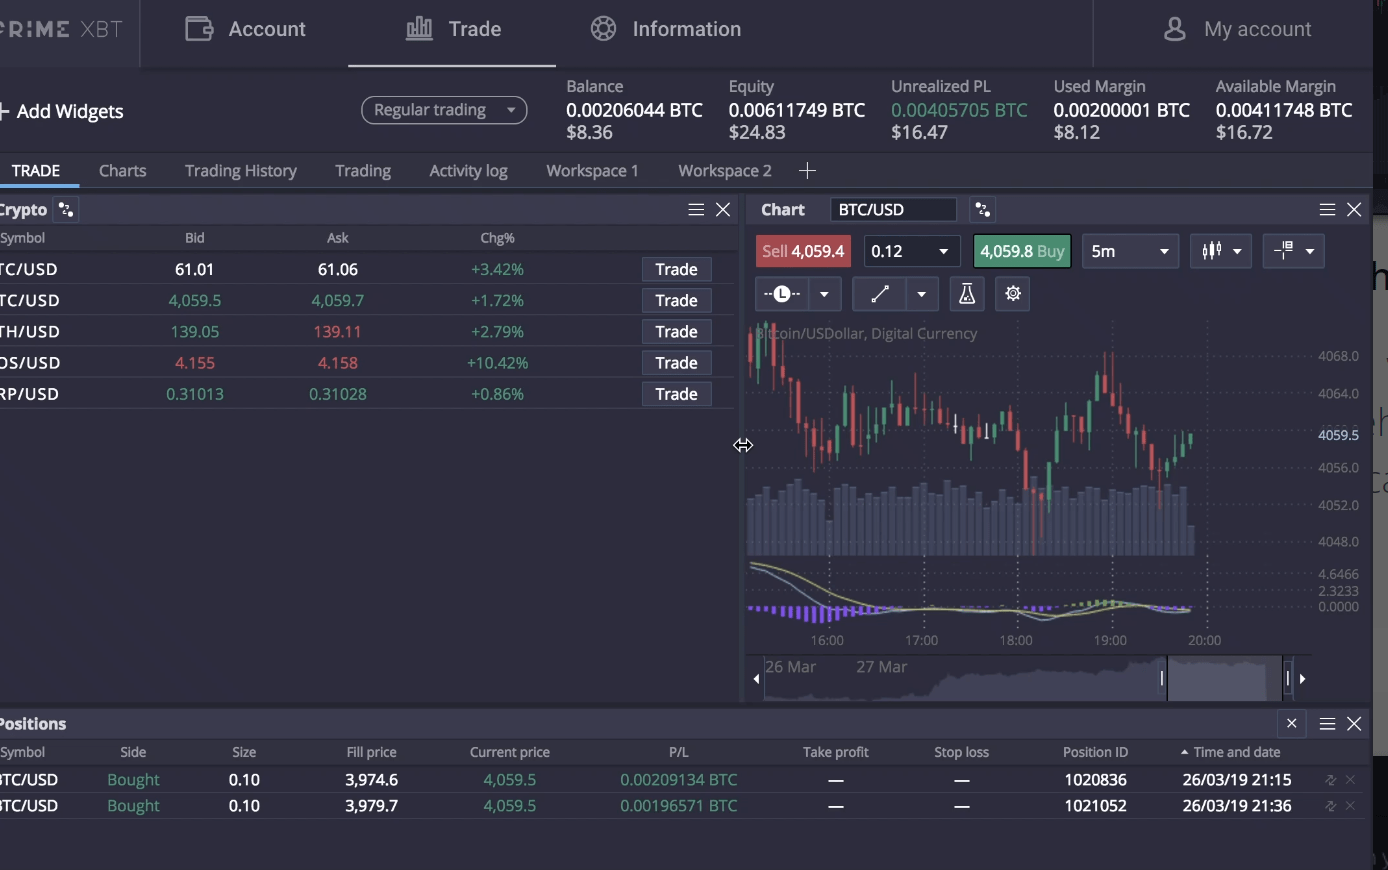 Prime XBT account trading